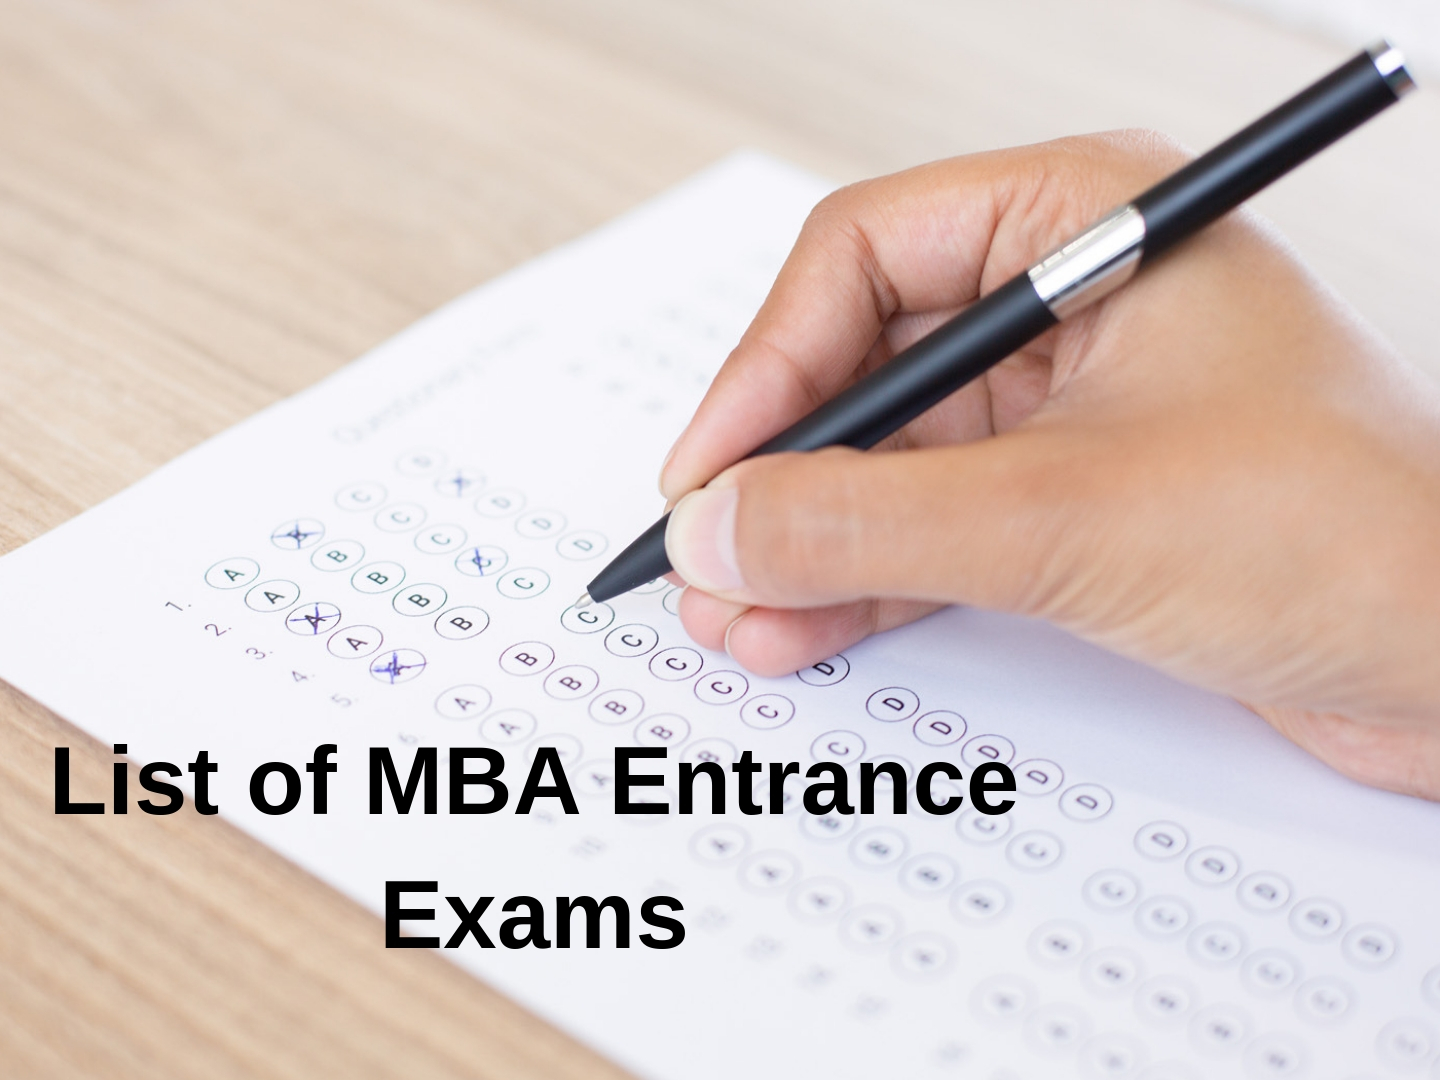 know-the-top-list-of-mba-entrance-exams-2019-check-here